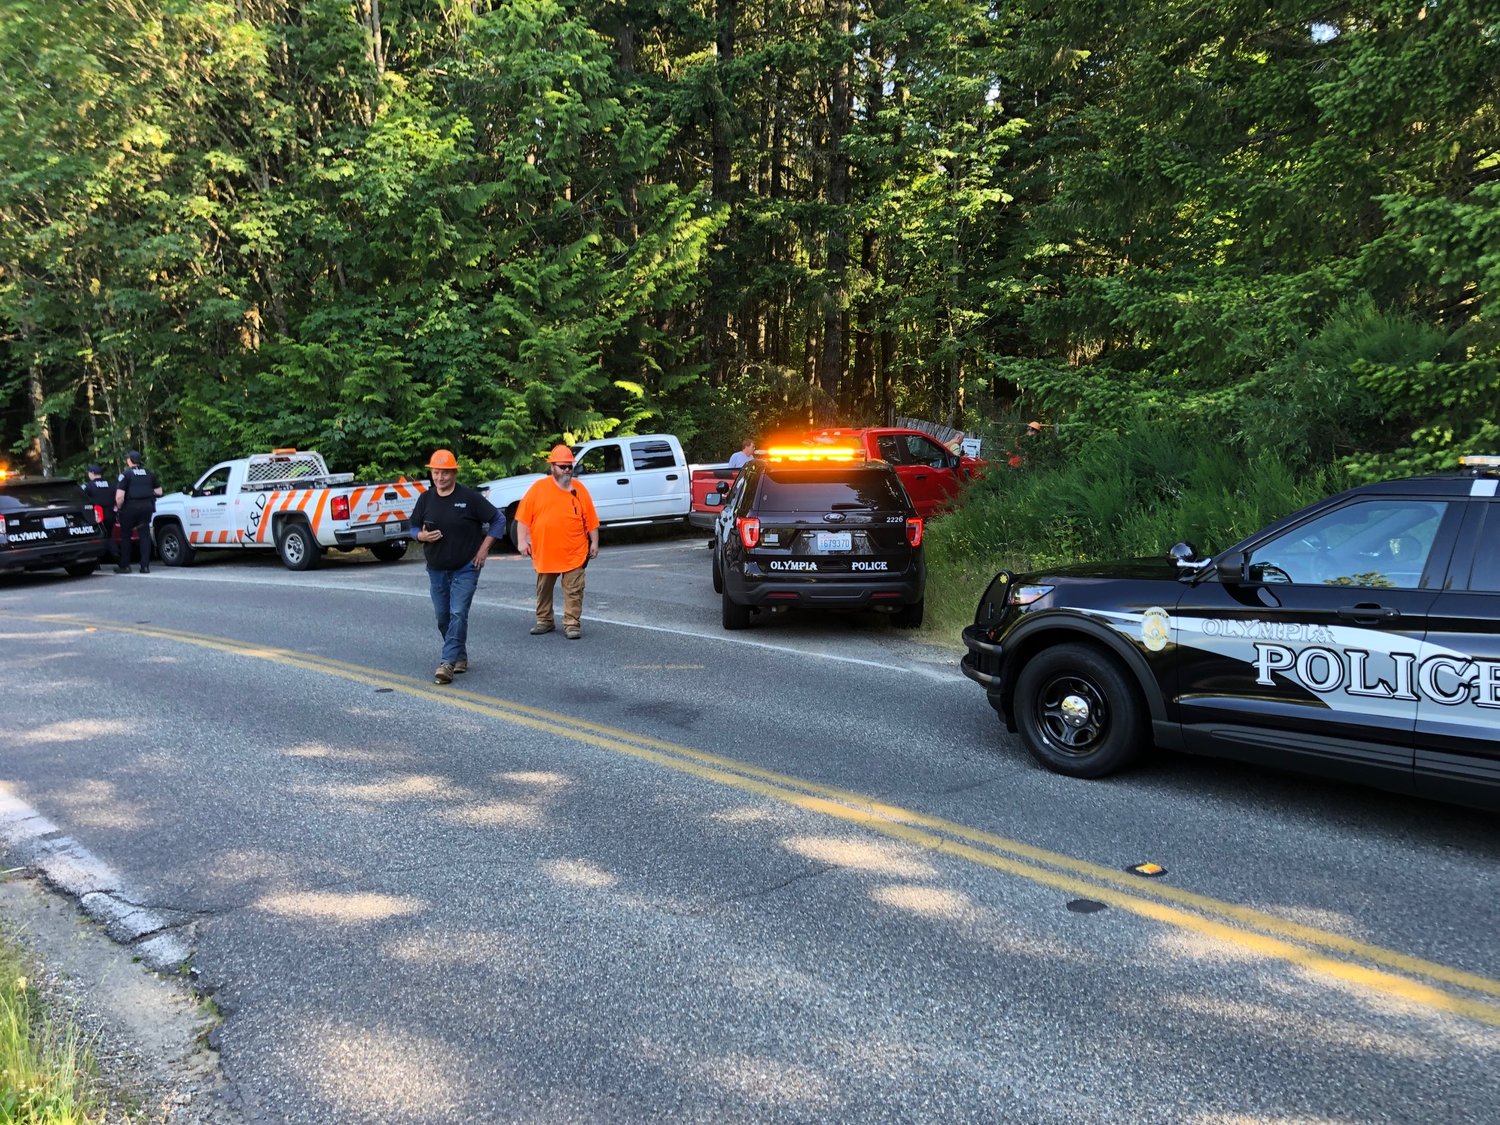 Four police vehicles and at least five officers were on the scene at Cooper Crest Forest on the morning of June 27, 2022.